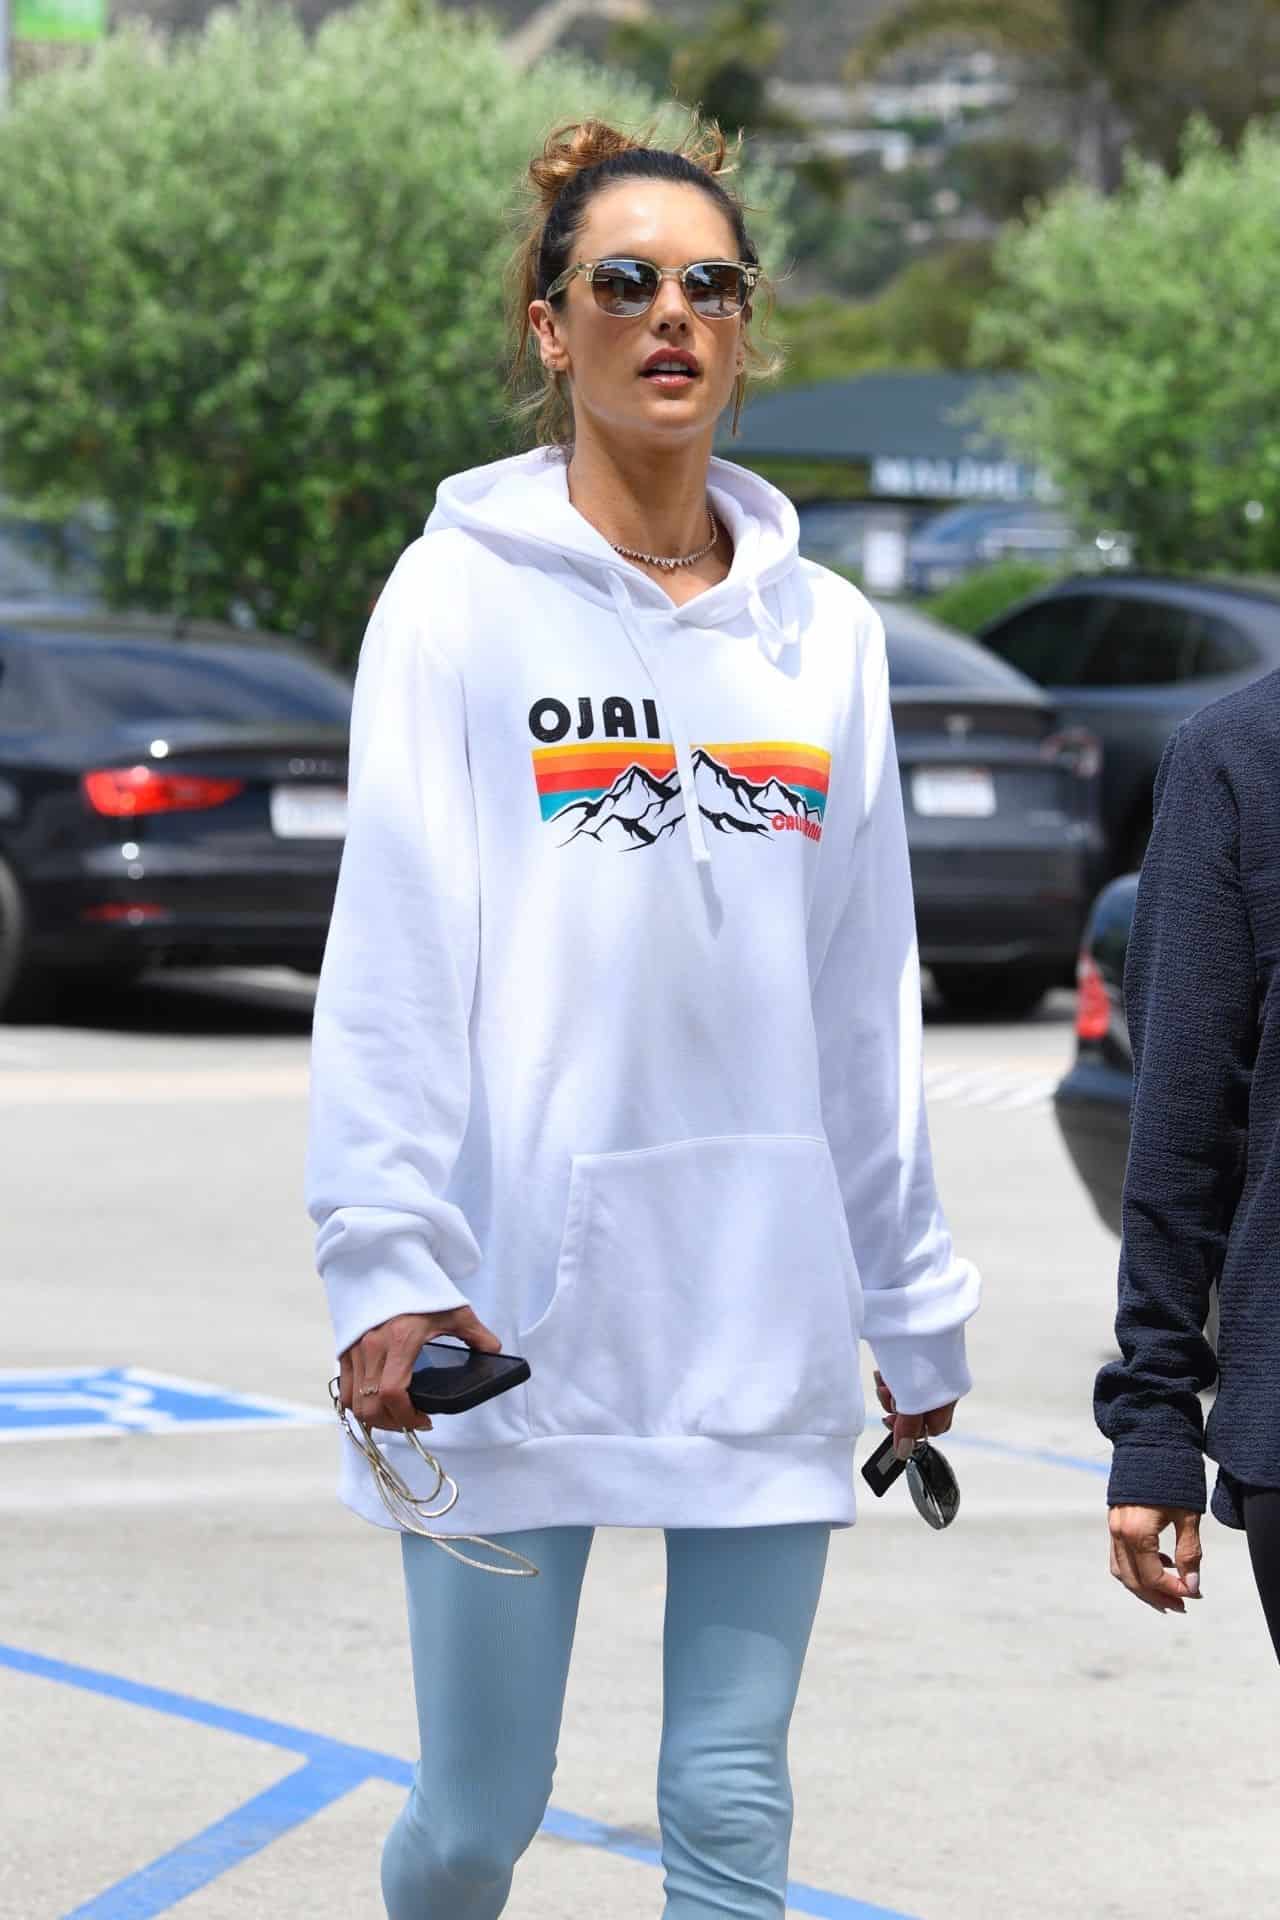 Alessandra Ambrosio Shows Off Her Toned Physique After Pilates Class